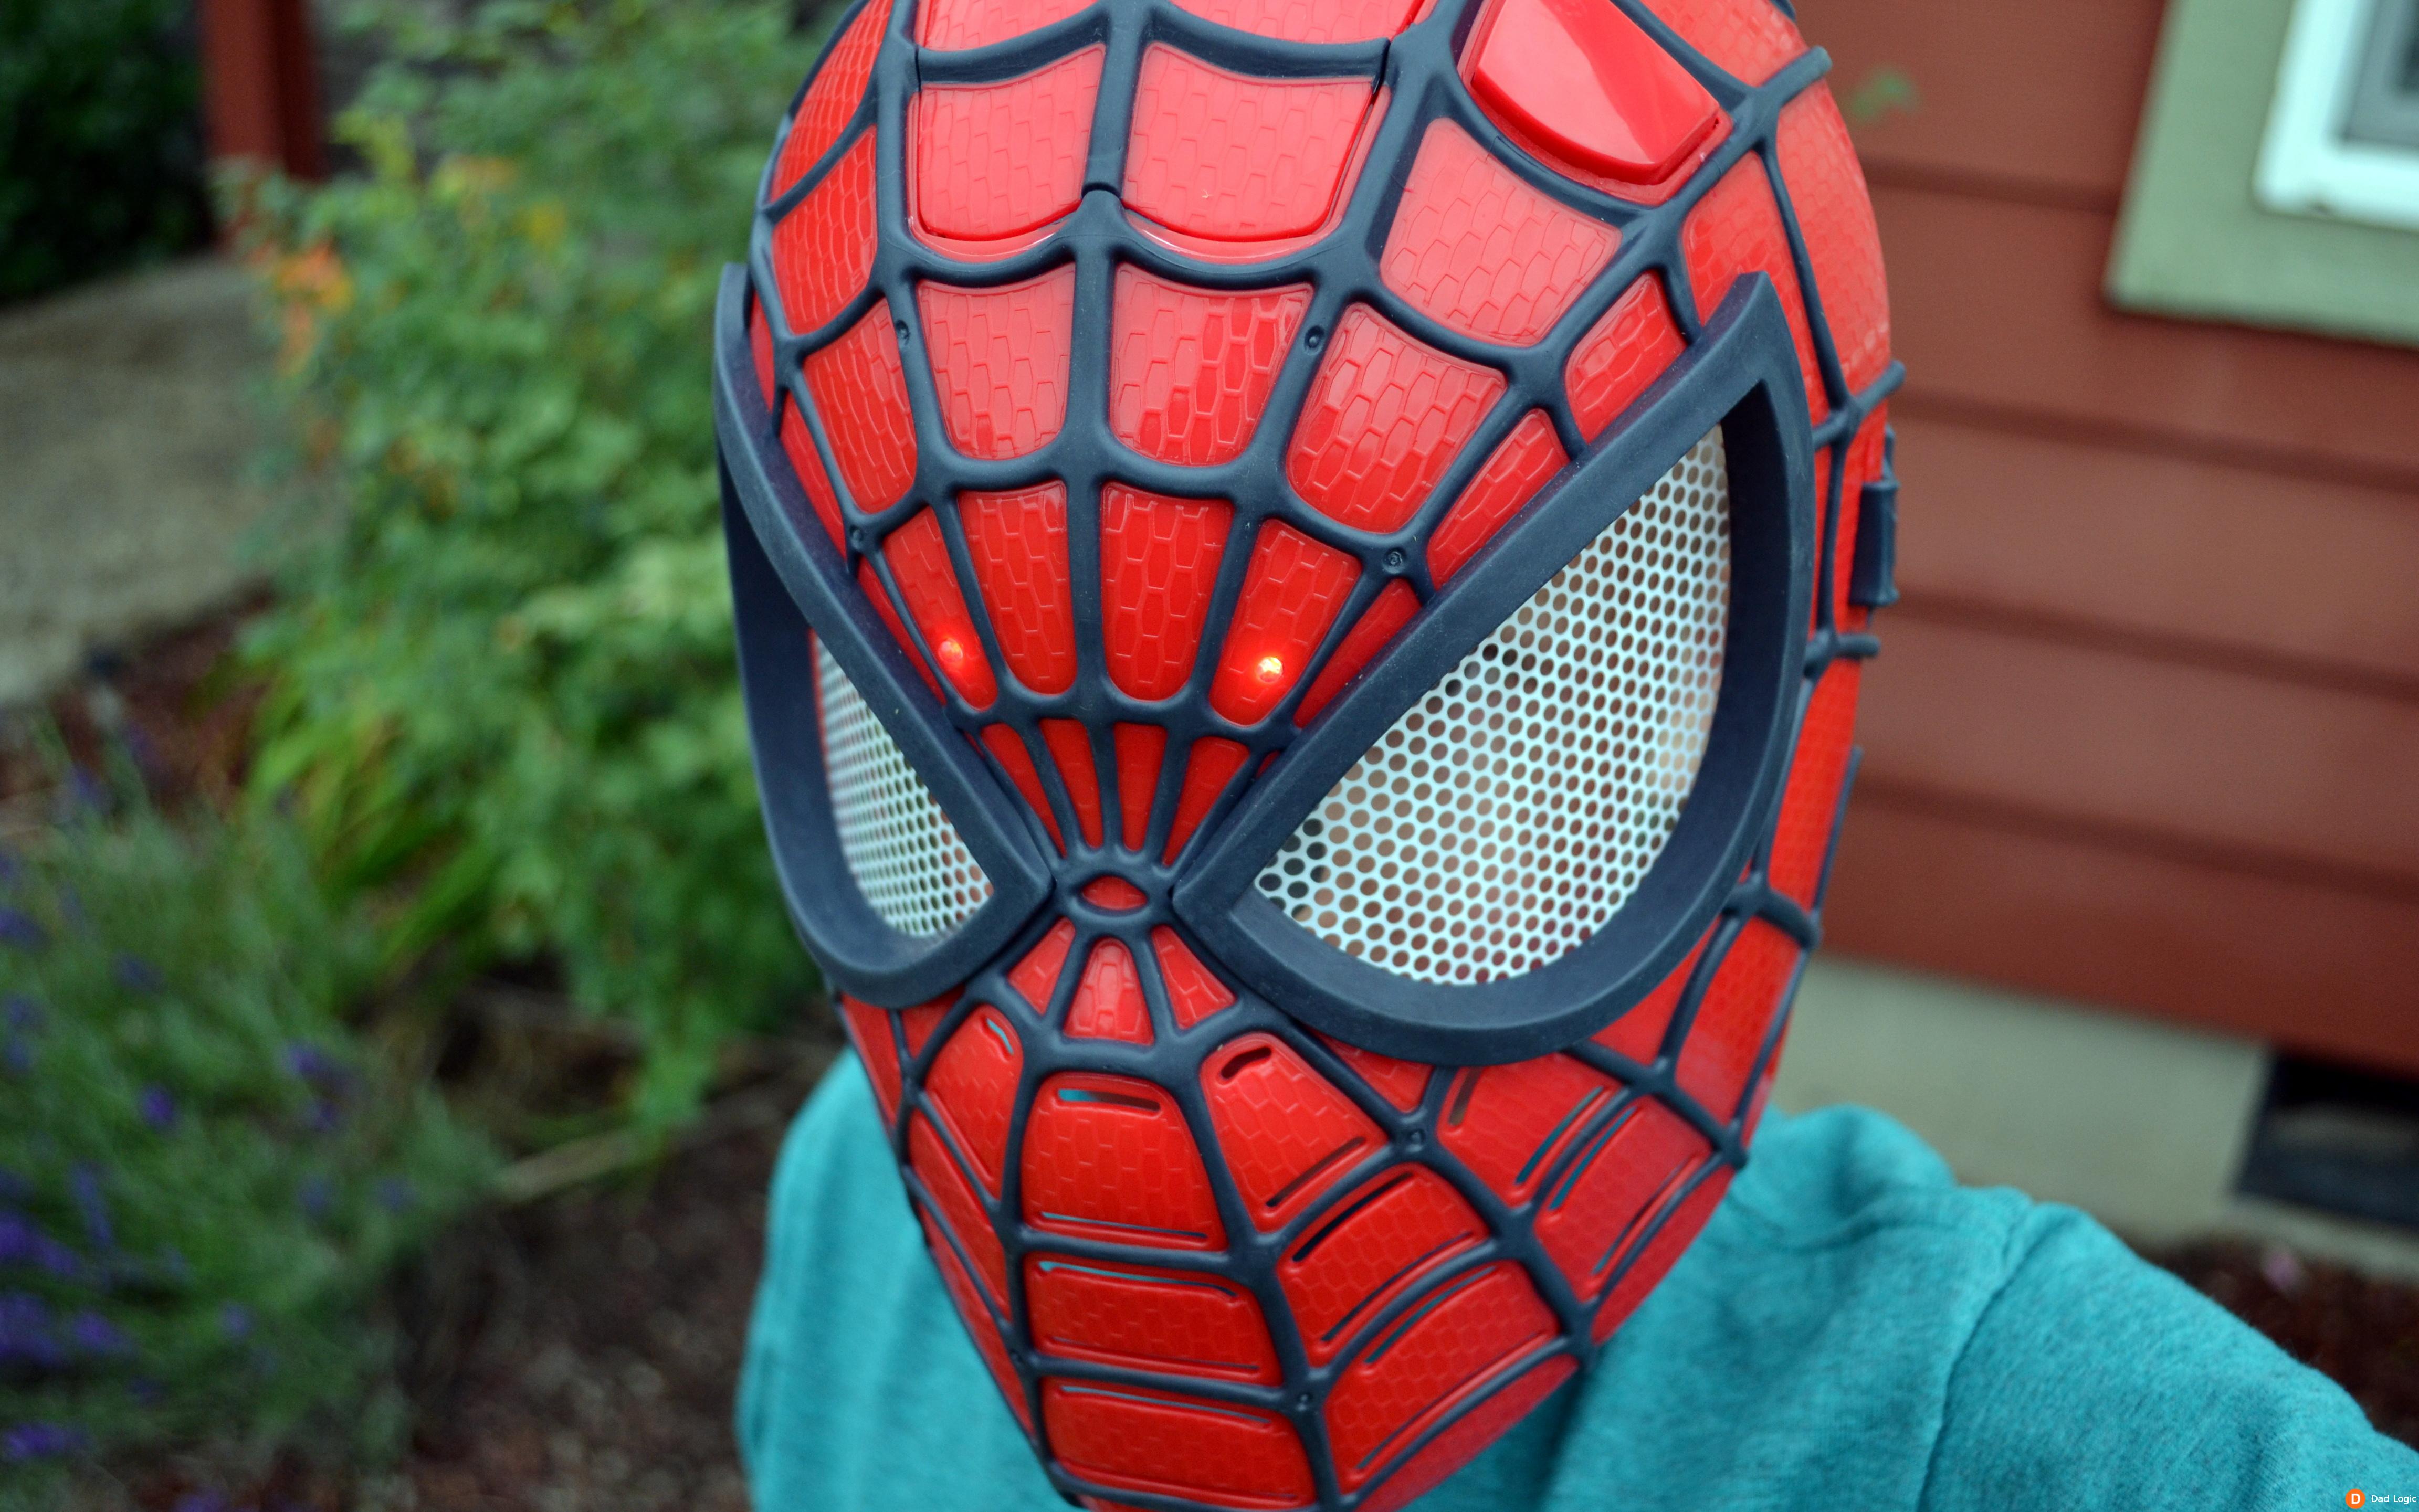 The Spider Vision Mask comes with two glowing web discs that let you preten...